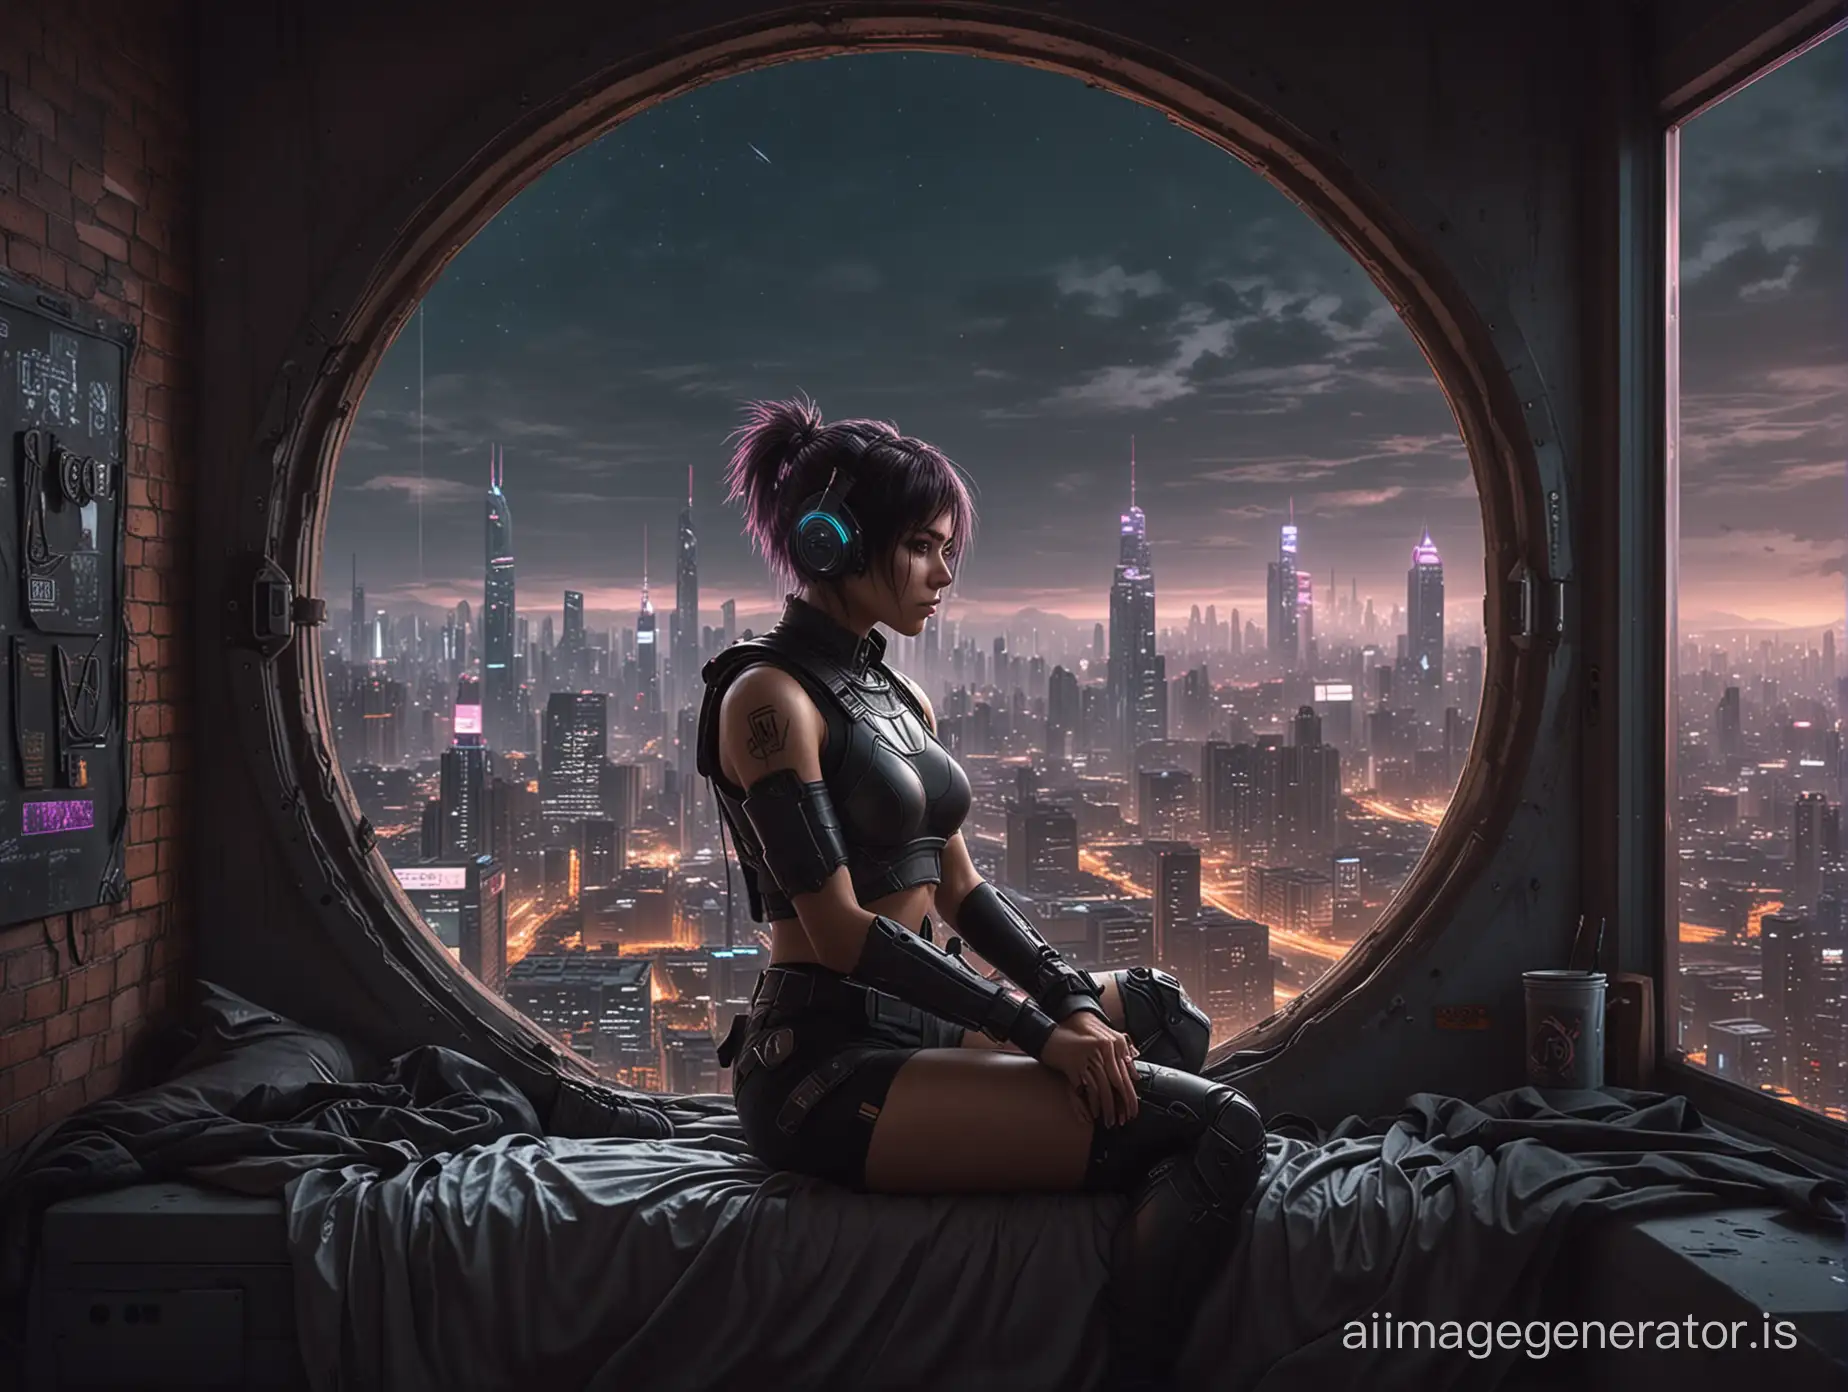 create a realistic picture of a cyberpunk girl who is sitting on the edge of a cyberpunk girl sitting on the round window of her big room with a view of a cyberpunk city at night wearing a tactical outfit with messy bob-cut hair and looking outside
add a bed and a desktop to her room